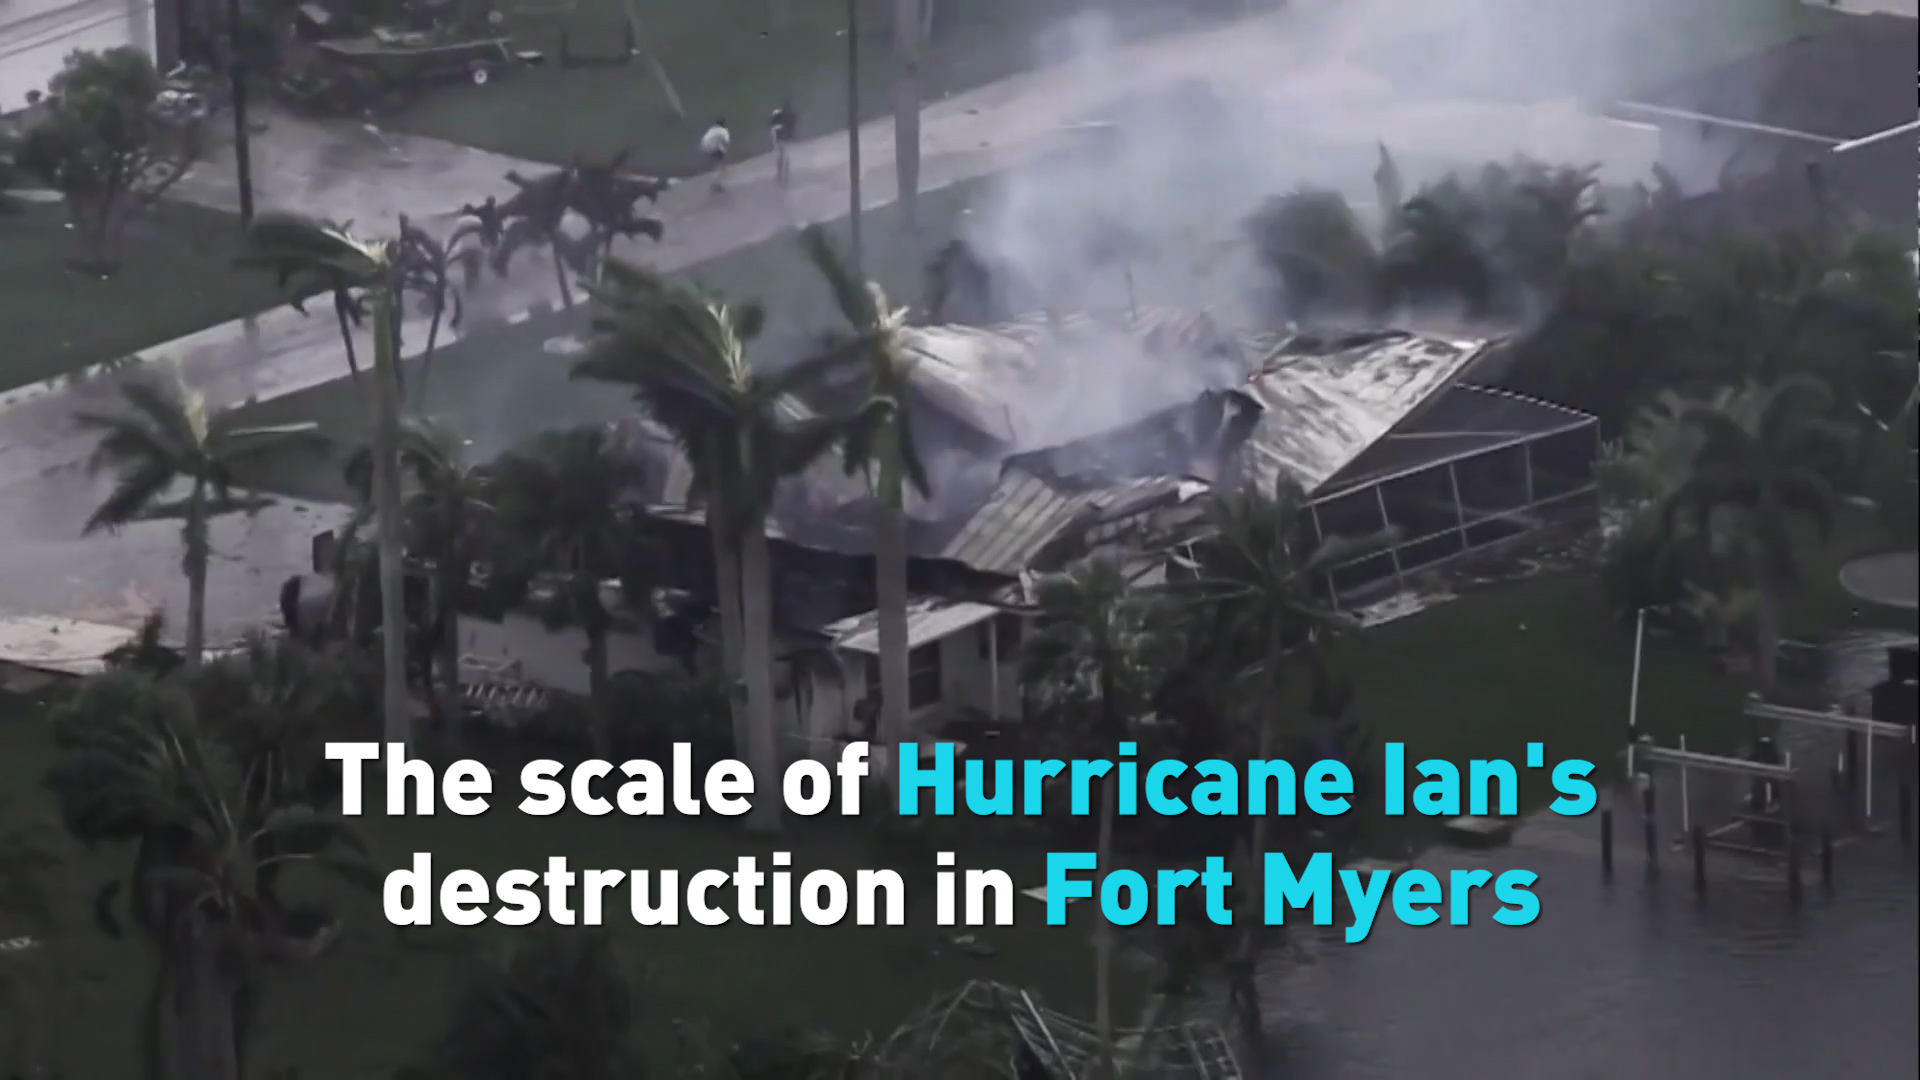 The scale of Hurricane Ian's destruction in Fort Myers